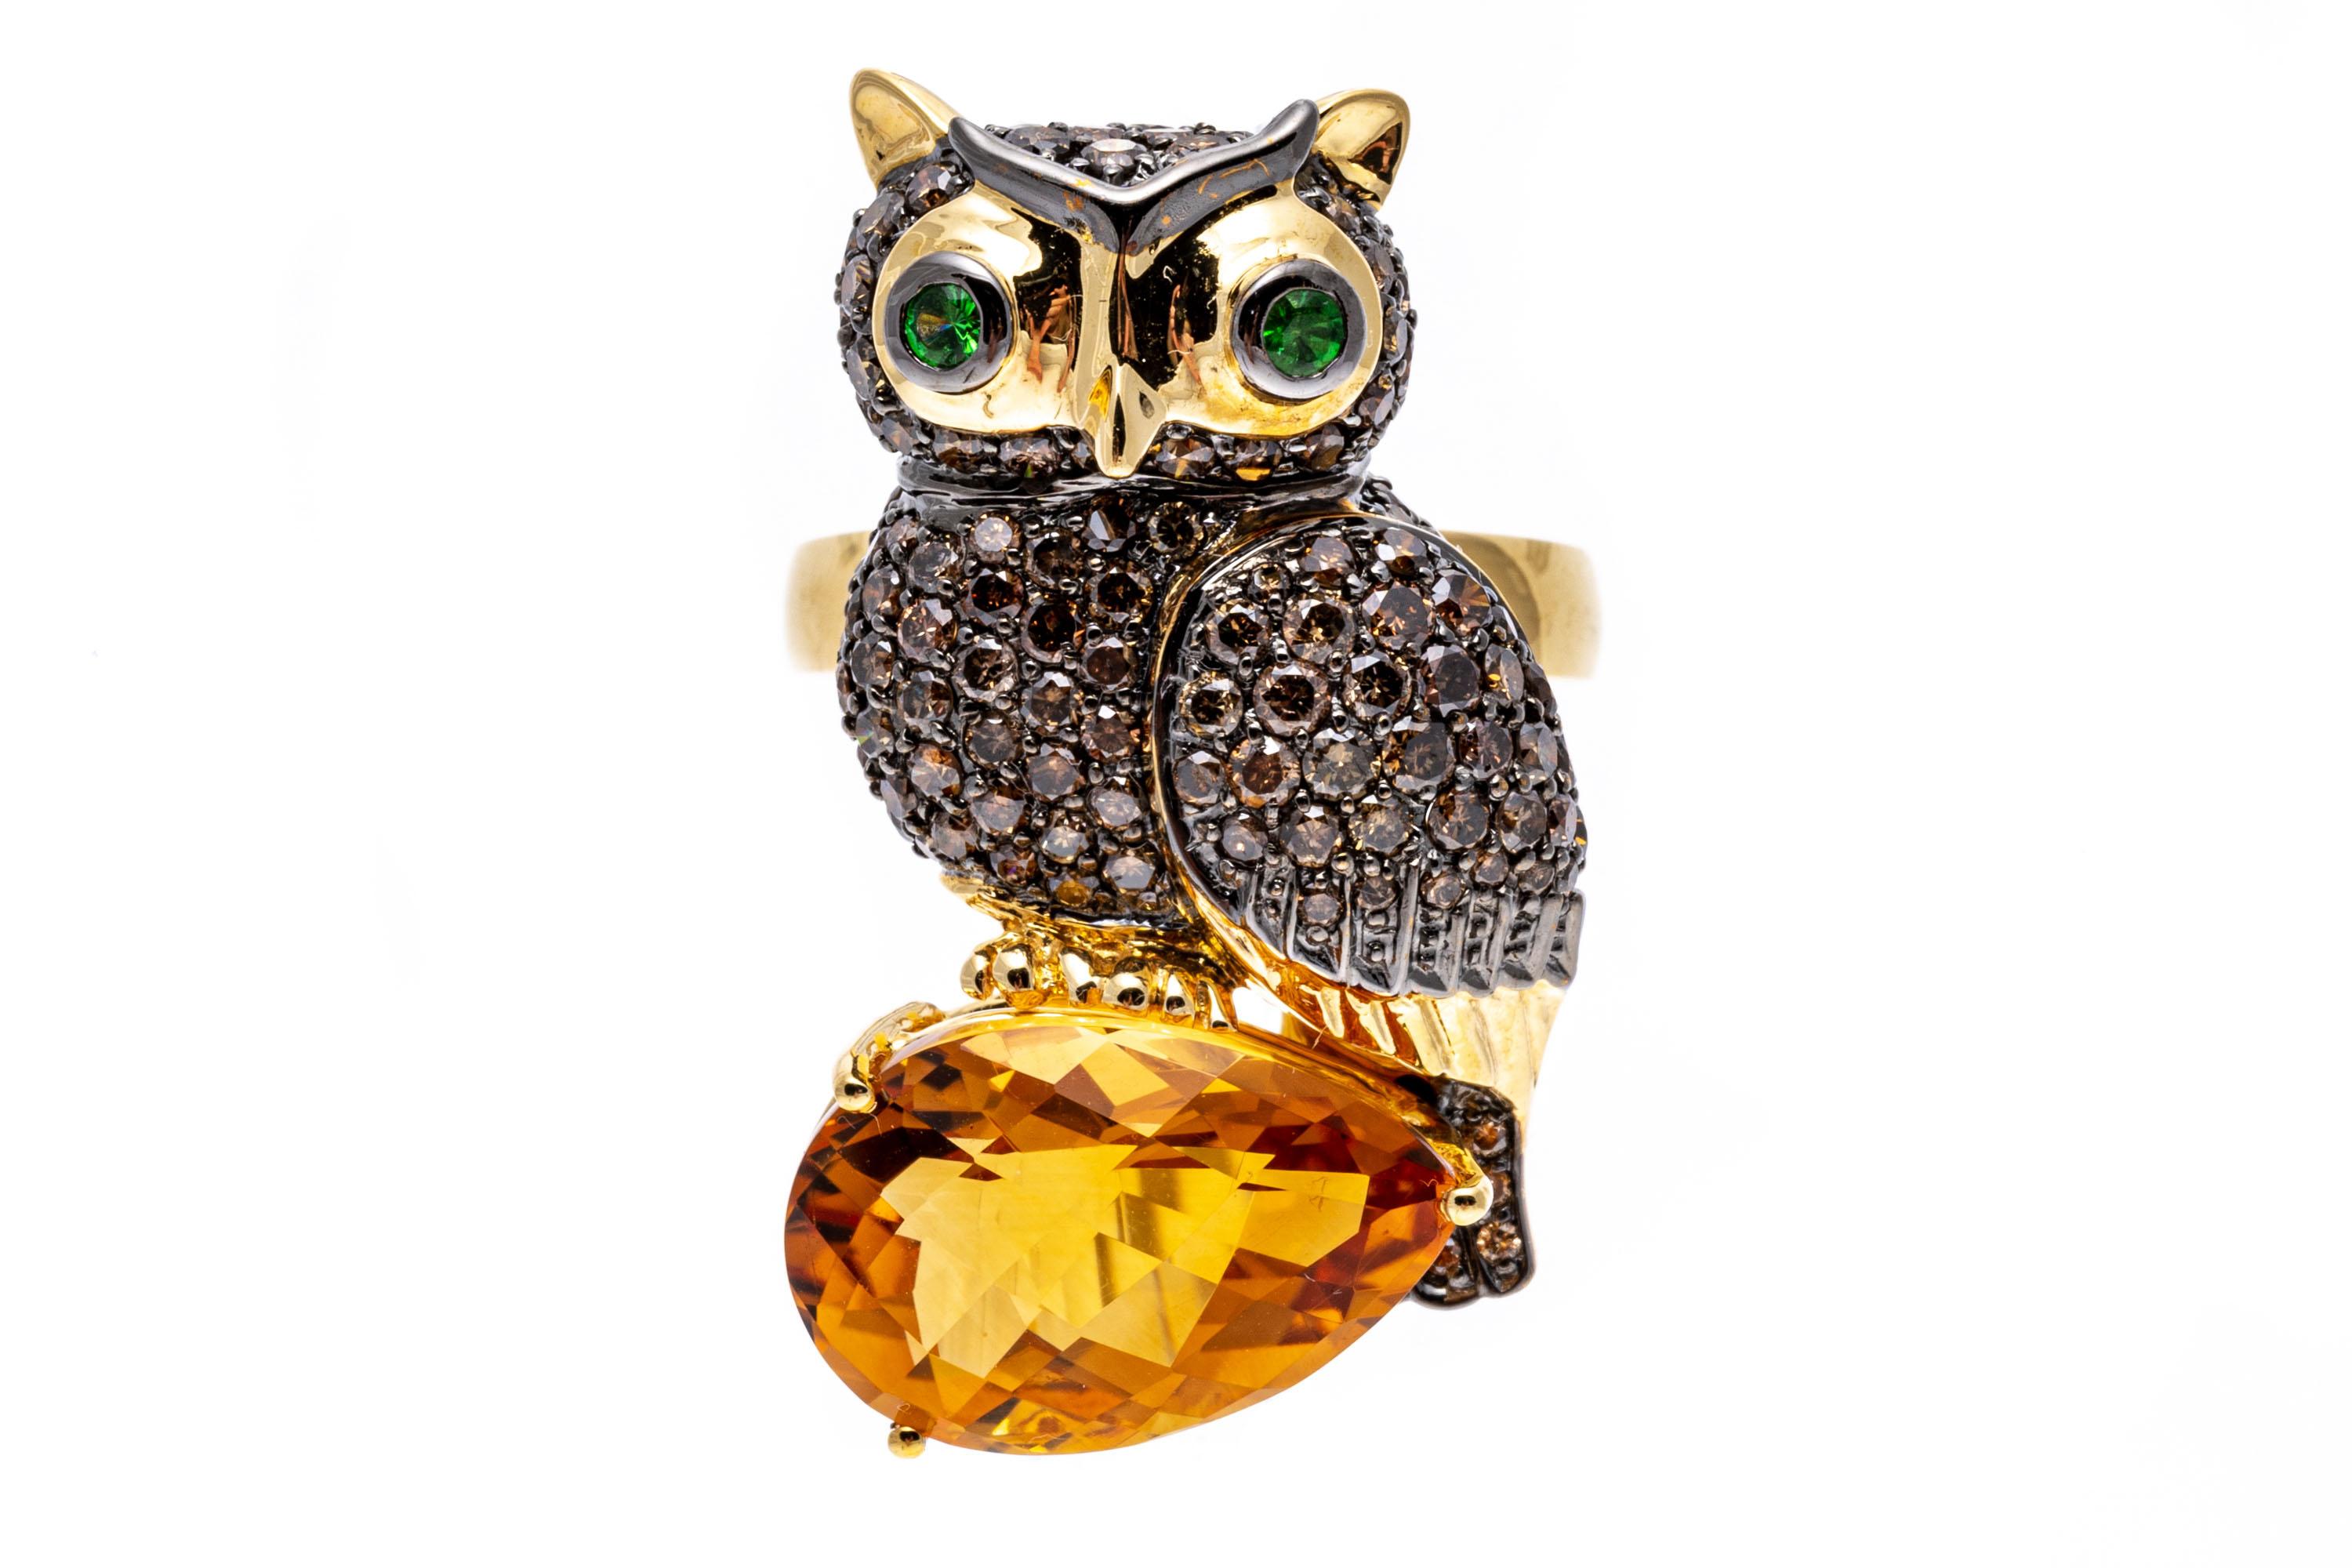 18k Gold Cognac Diamond Owl Ring/Pendant Set with Tourmaline and Citrine For Sale 5